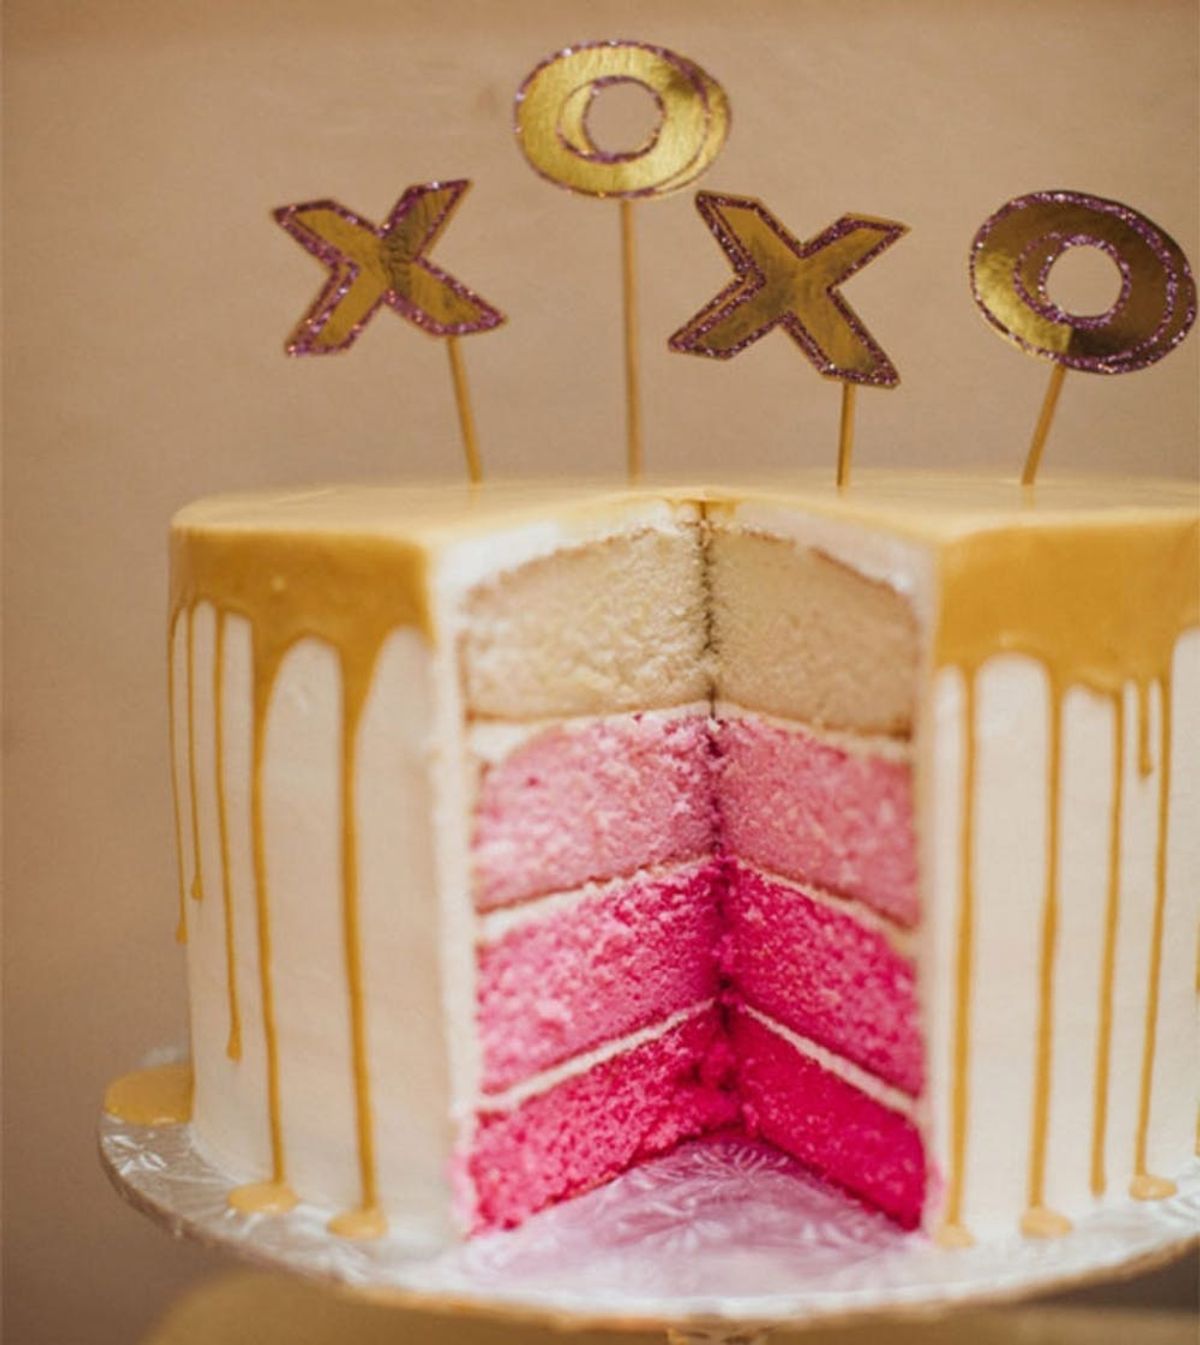 Let’s Get This Party Started: 16 Swoon-Worthy Ideas for a Valentine’s Soirée